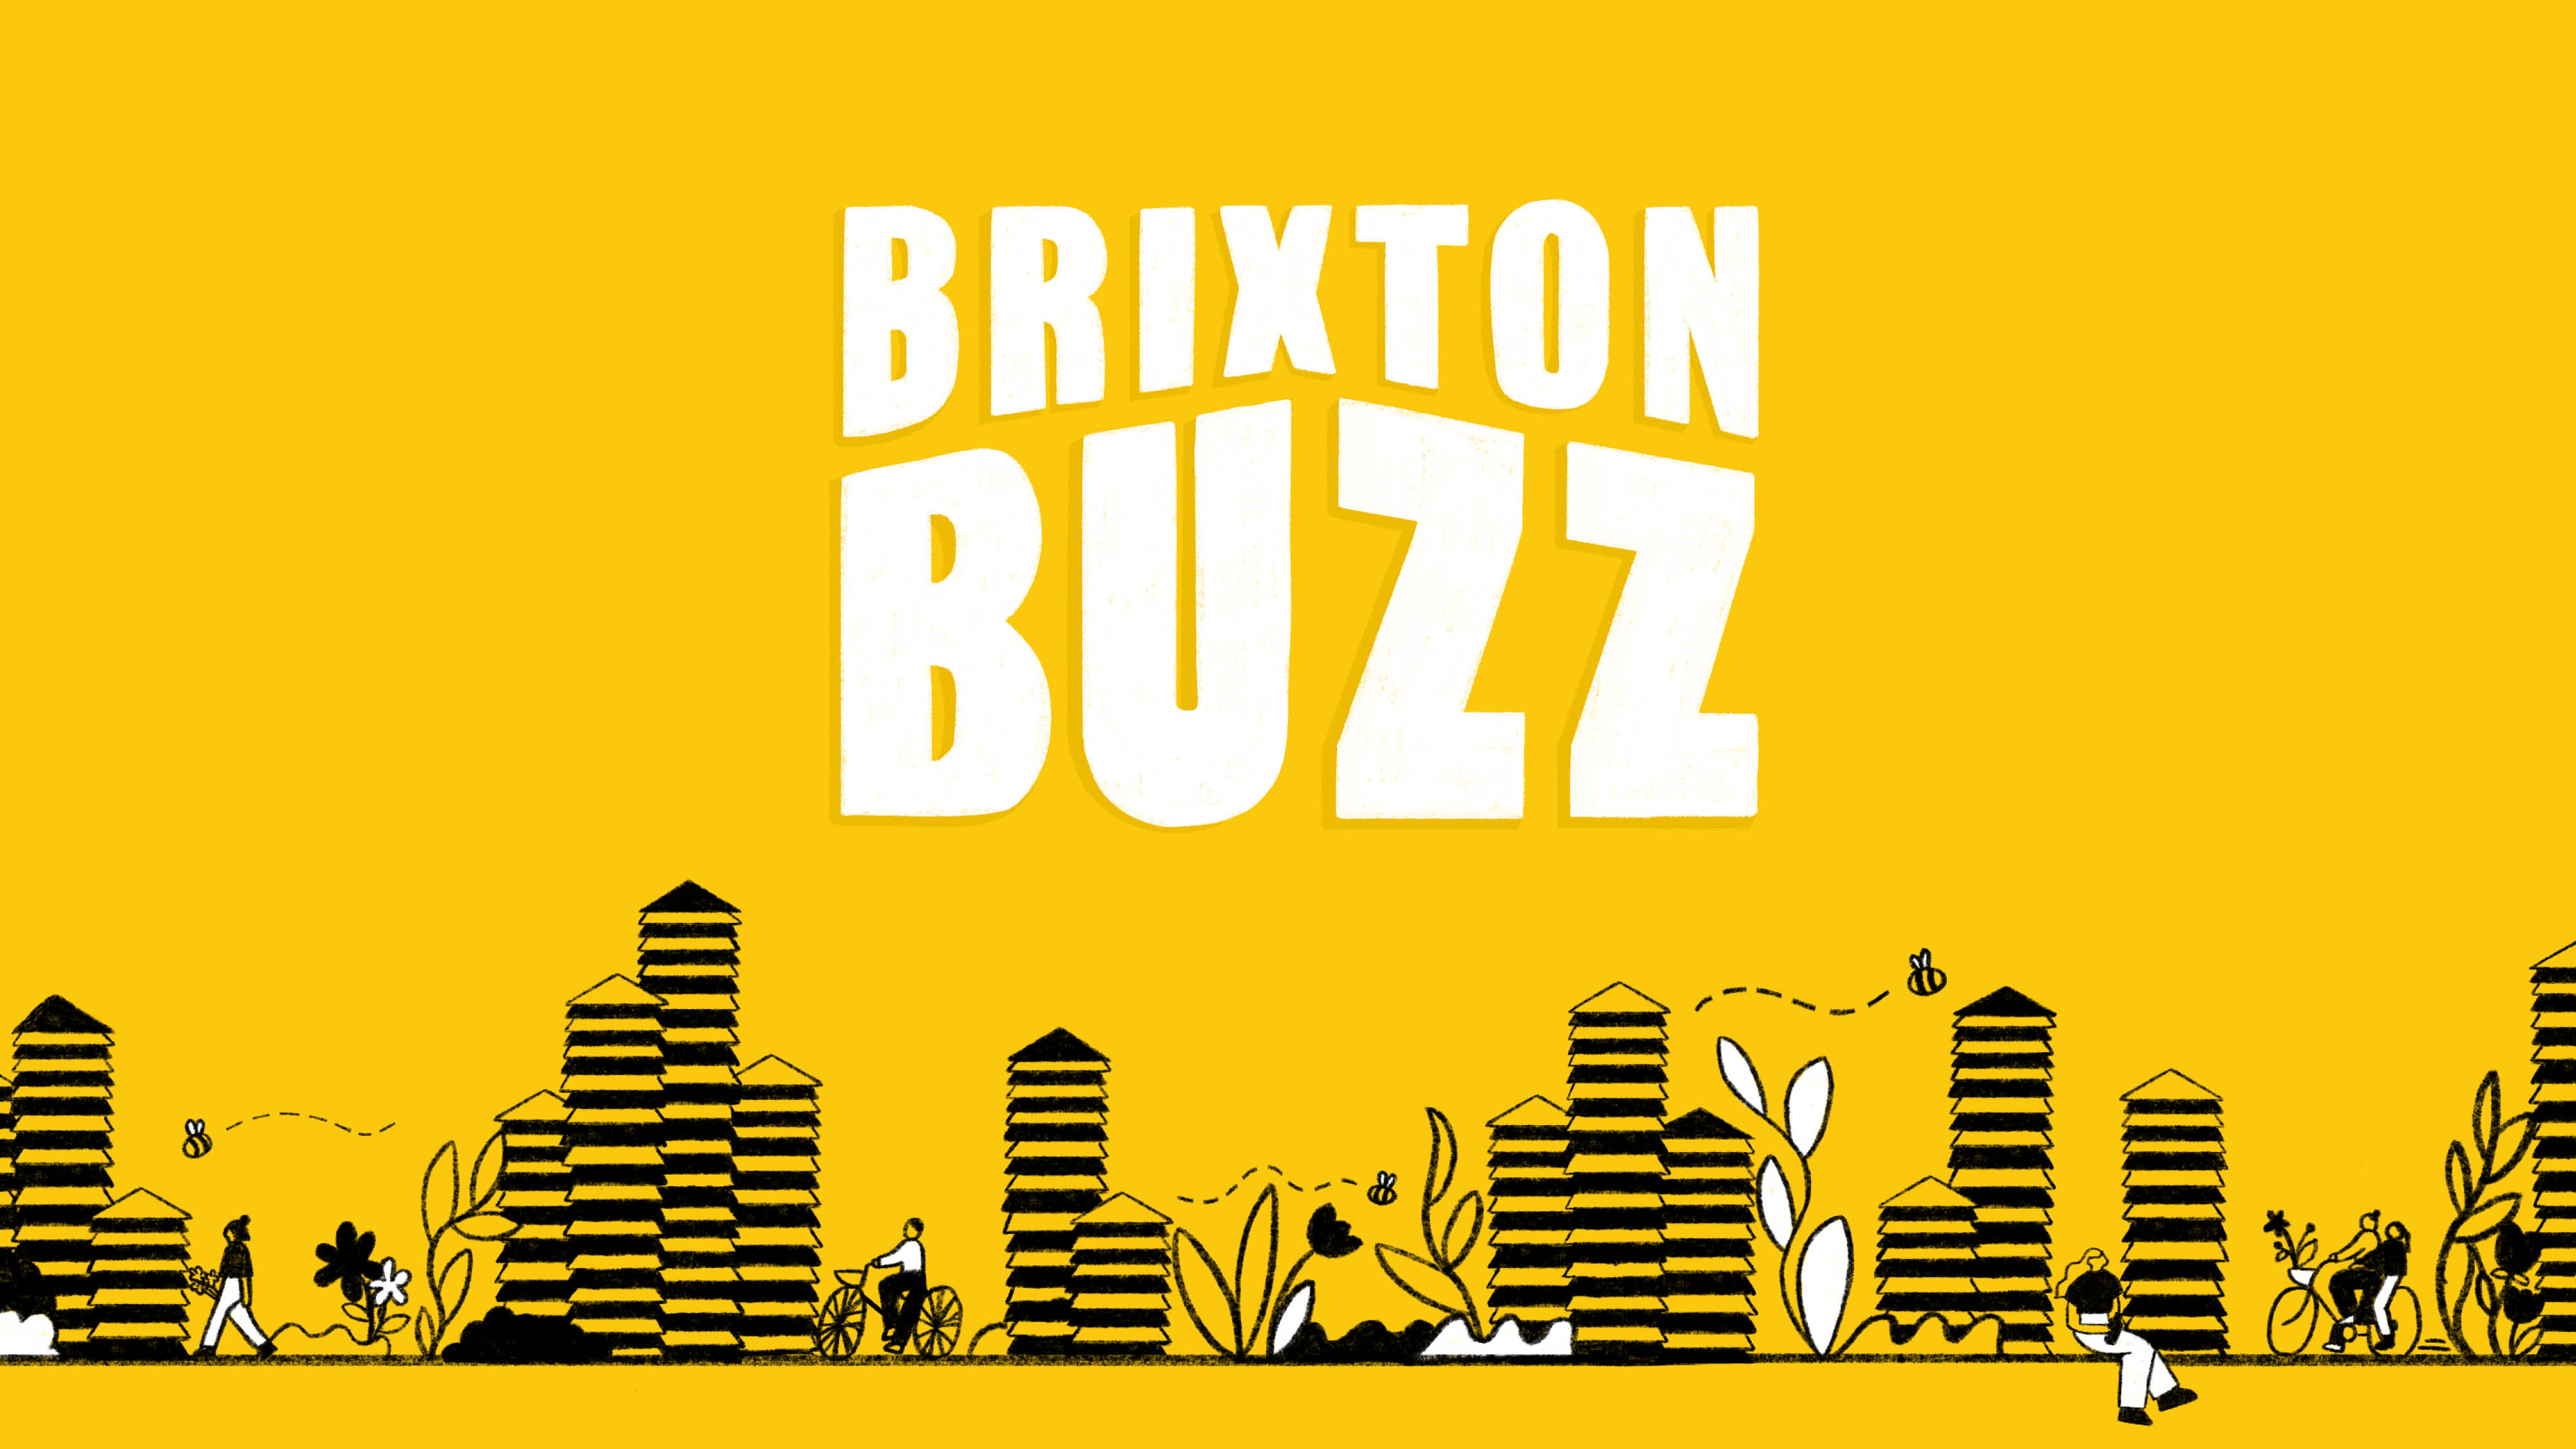 Logo and illustrations for Brixton Buzz, showing the cityscape made from beehives.